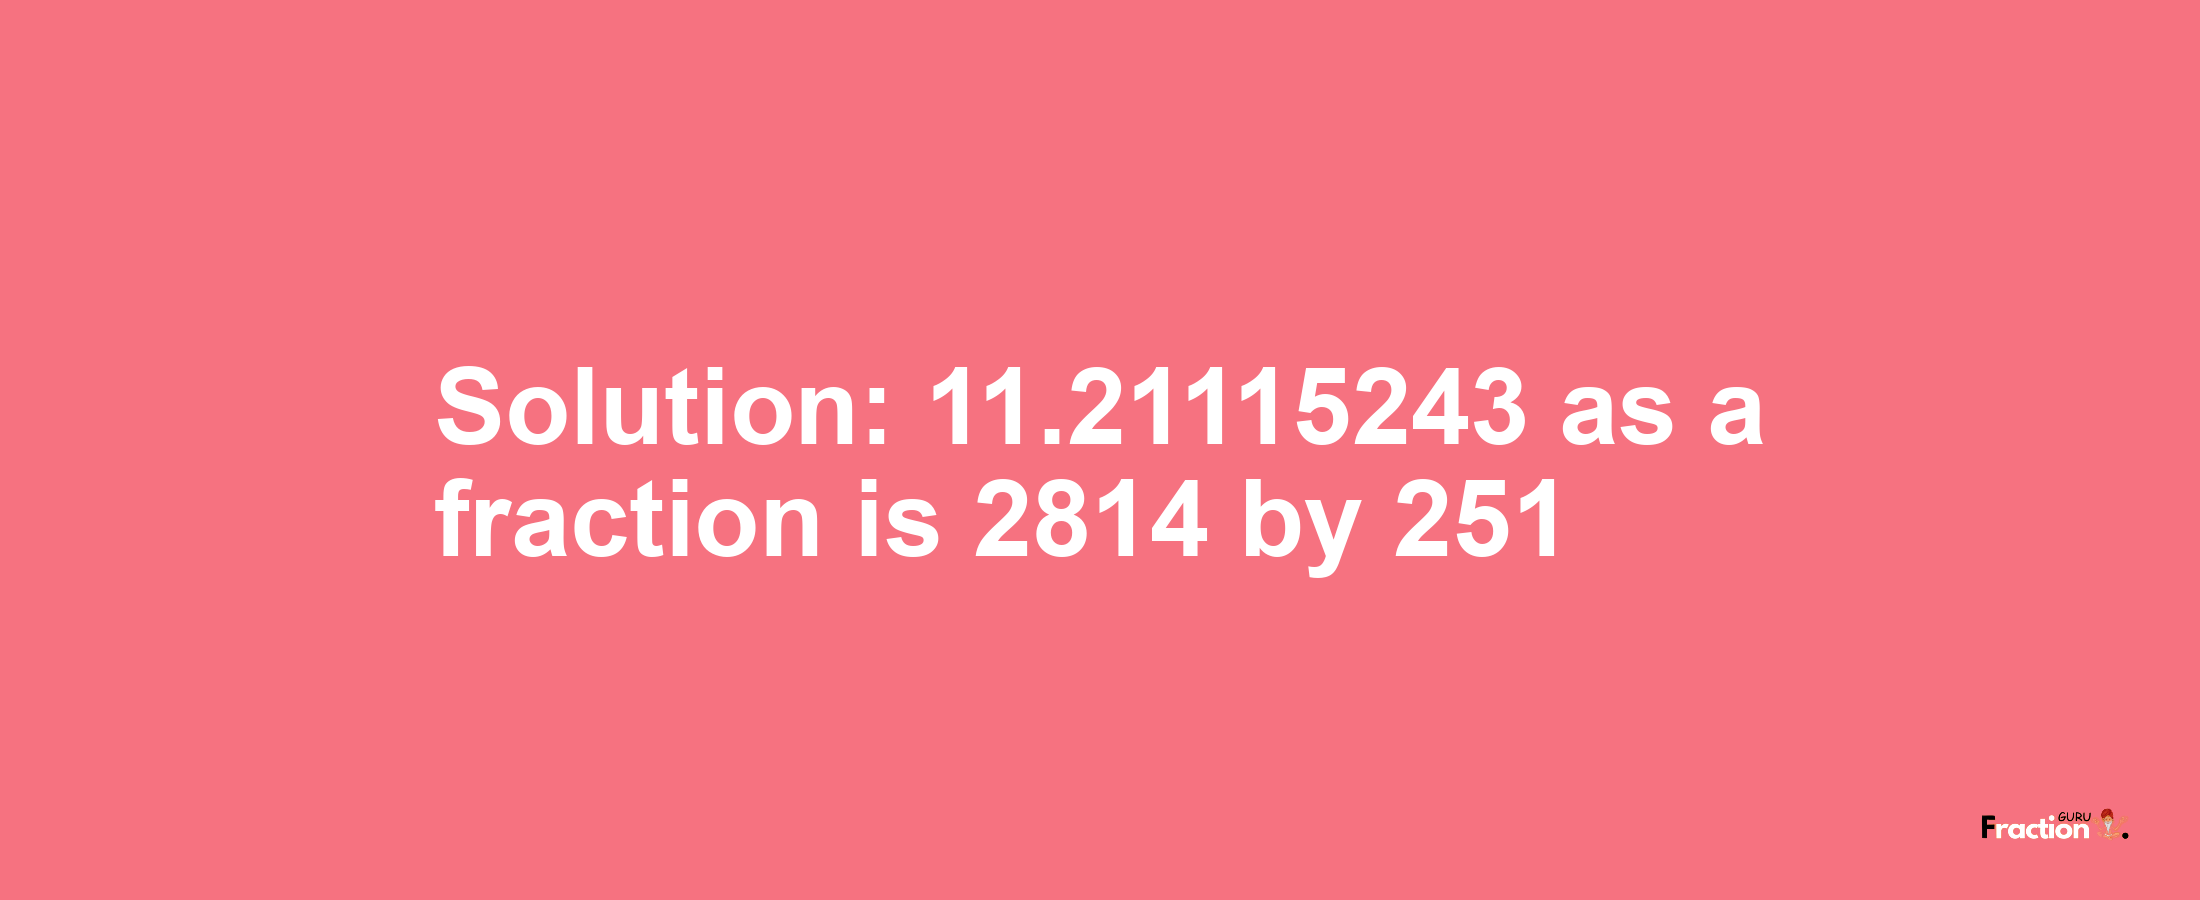 Solution:11.21115243 as a fraction is 2814/251